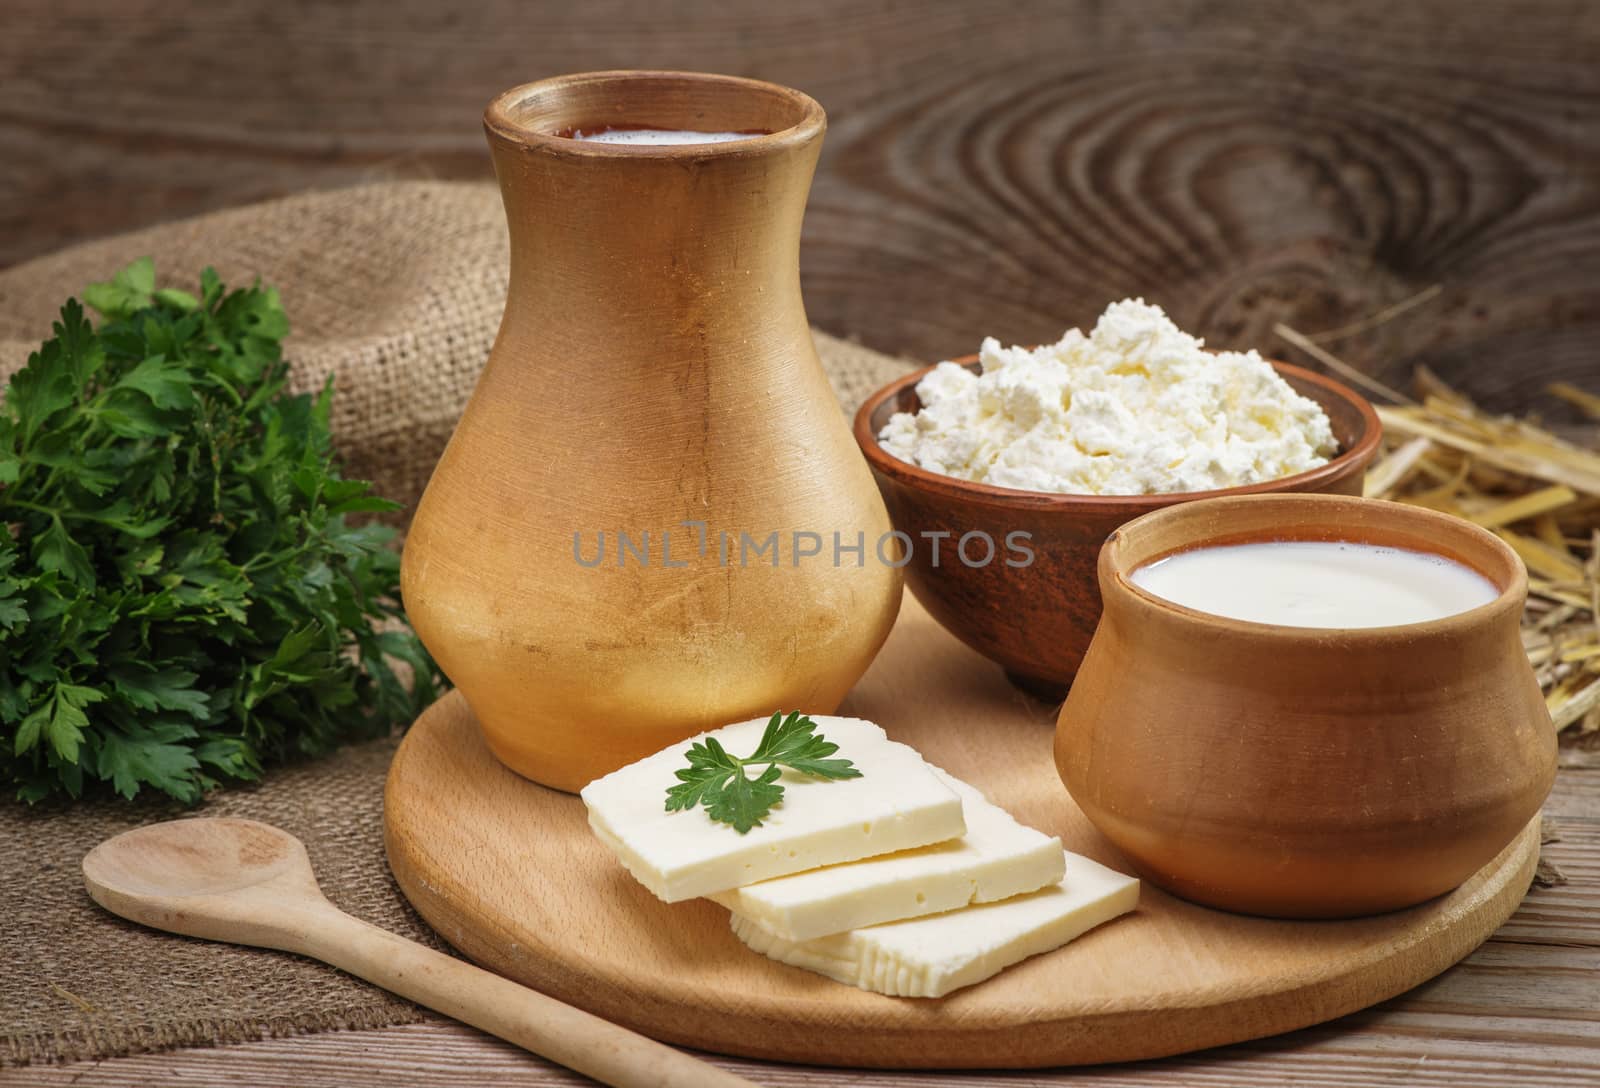 Rustic natural dairy products, whole milk in a clay jug and a cup, cottage cheese in a bowl, cut slices of cheese, parsley, burlap, straw on the old wooden background